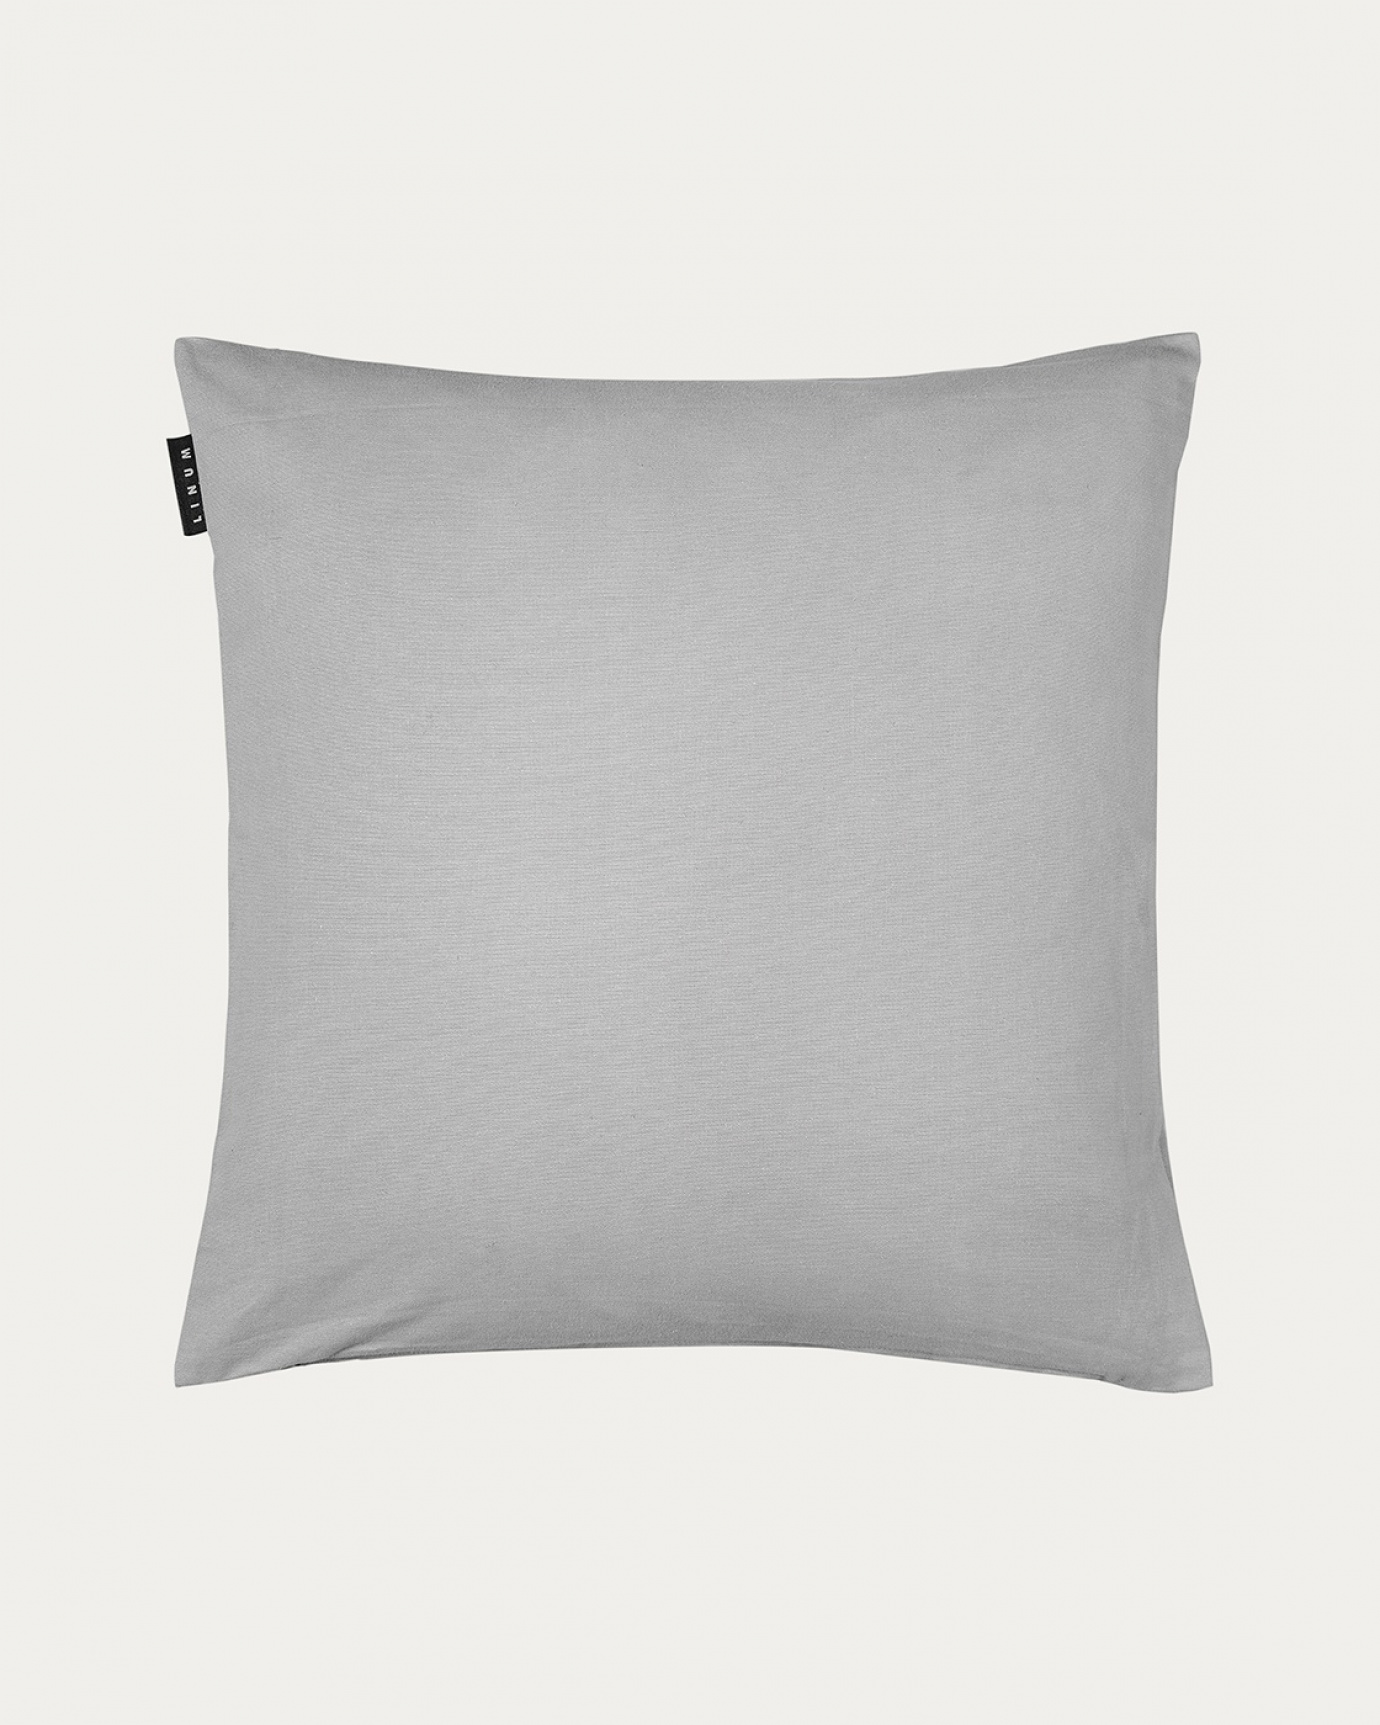 Product image light grey ANNABELL cushion cover made of soft cotton from LINUM DESIGN. Size 50x50 cm.